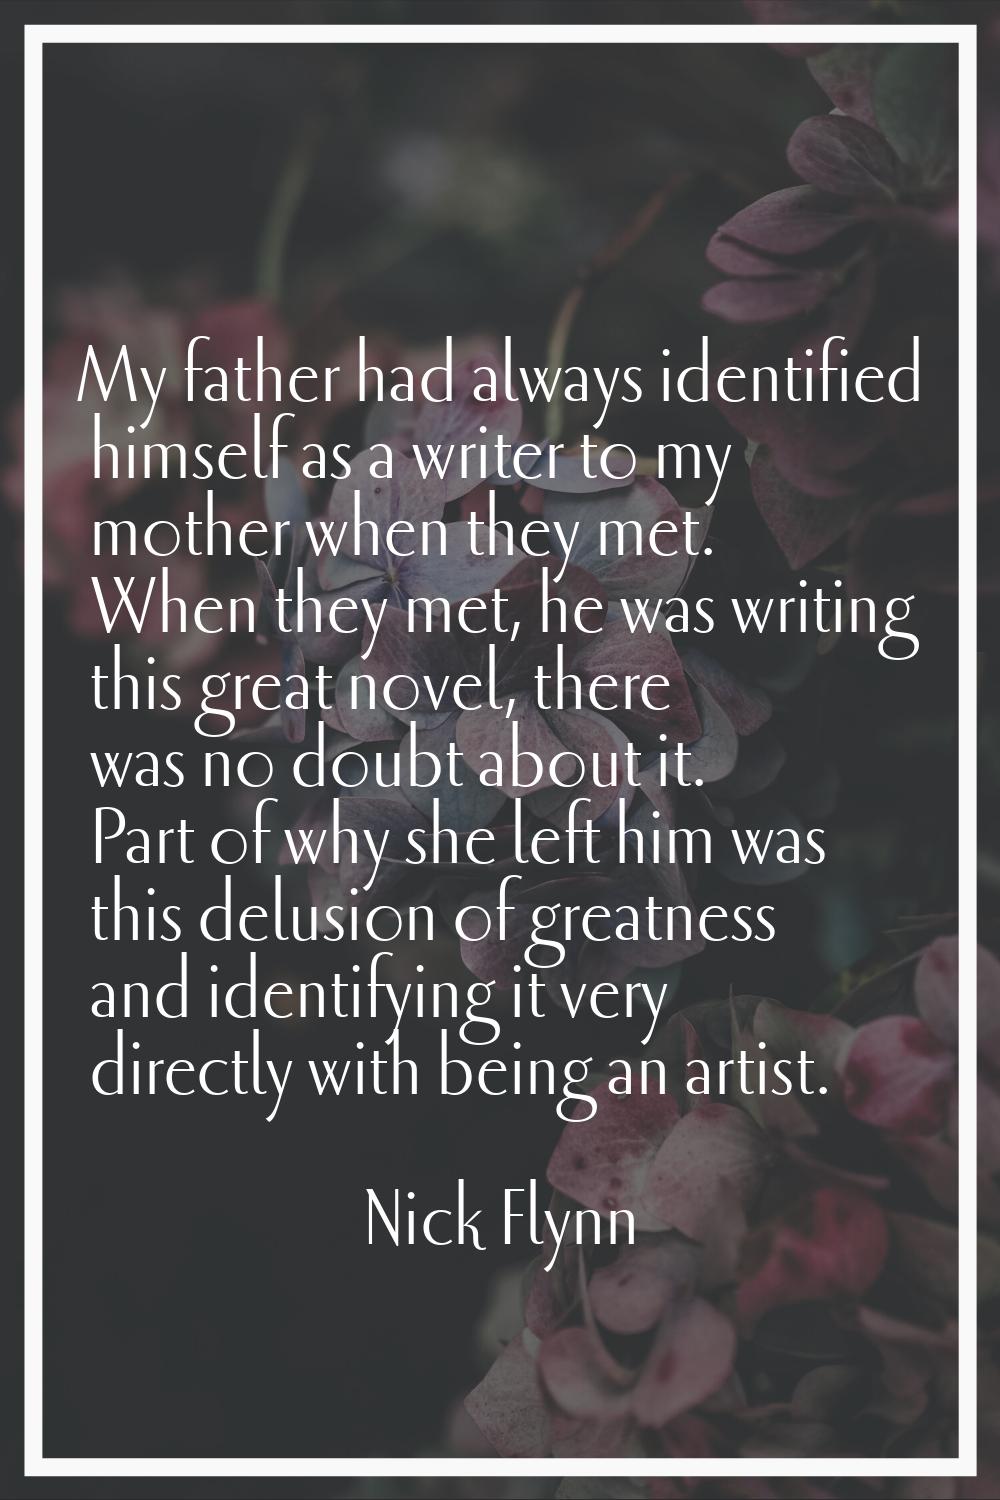 My father had always identified himself as a writer to my mother when they met. When they met, he w